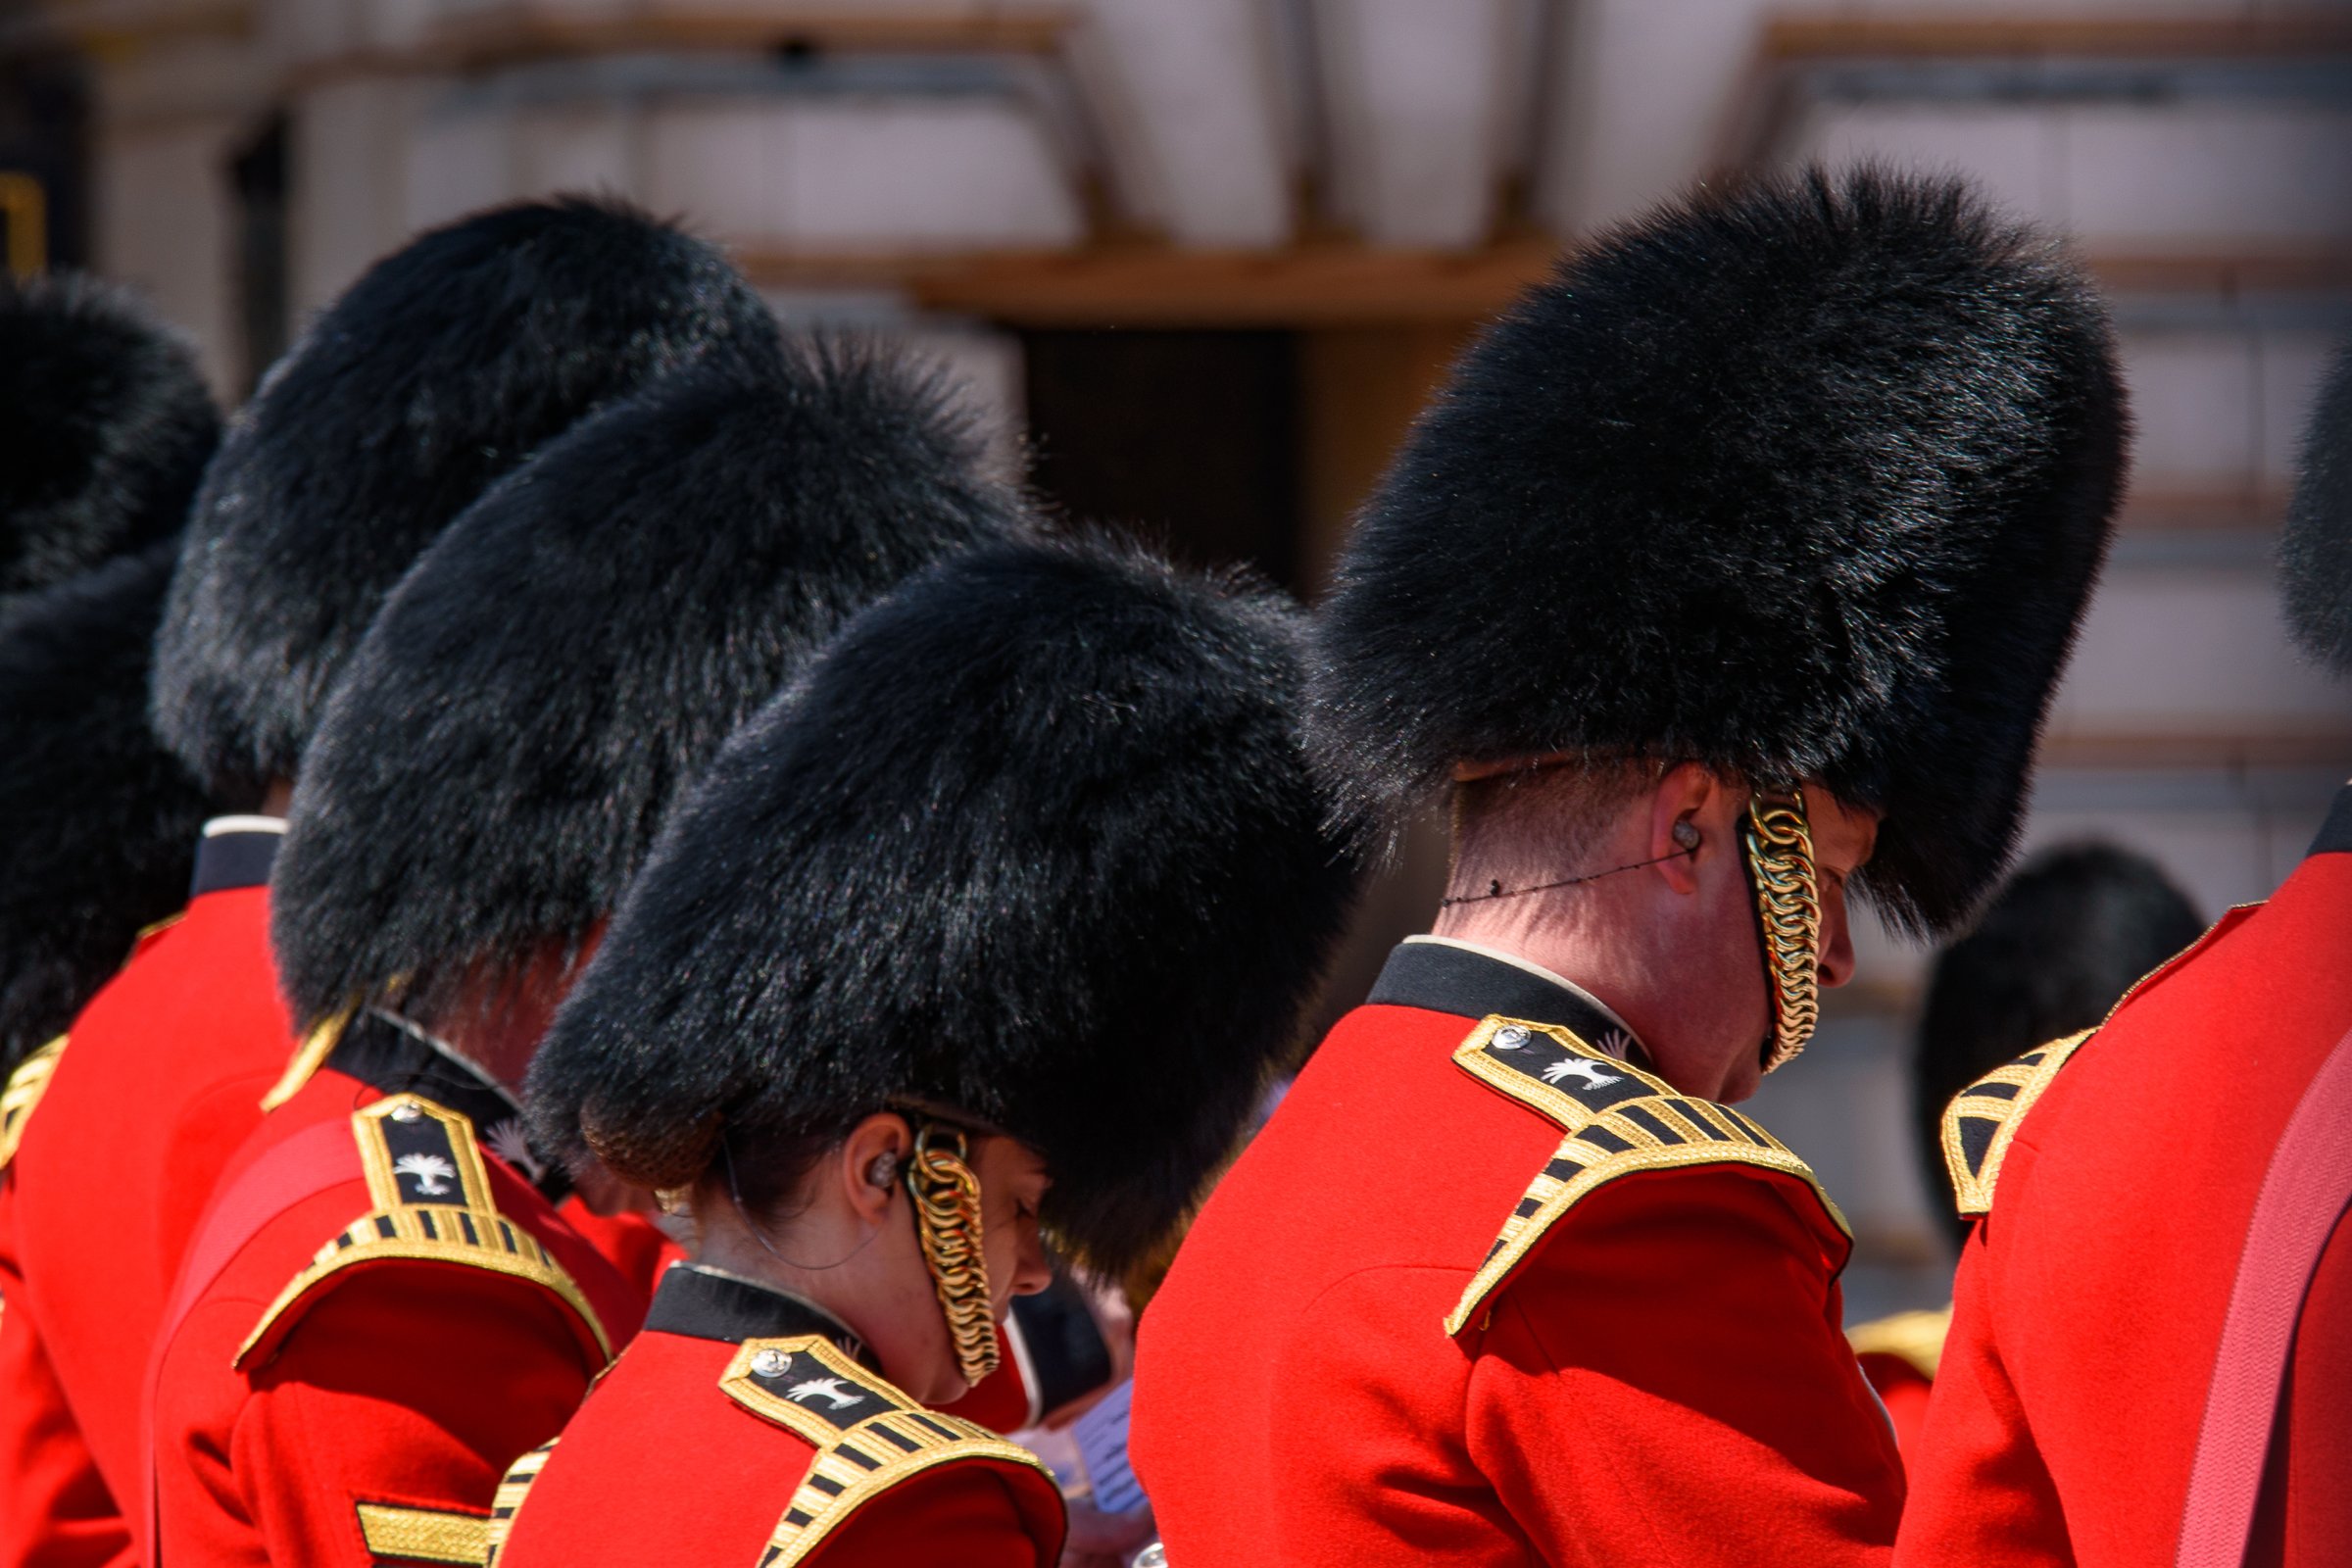 Ceremony of Changing the Guard on the forecourt of Buckingham Palace, London, United Kingdom